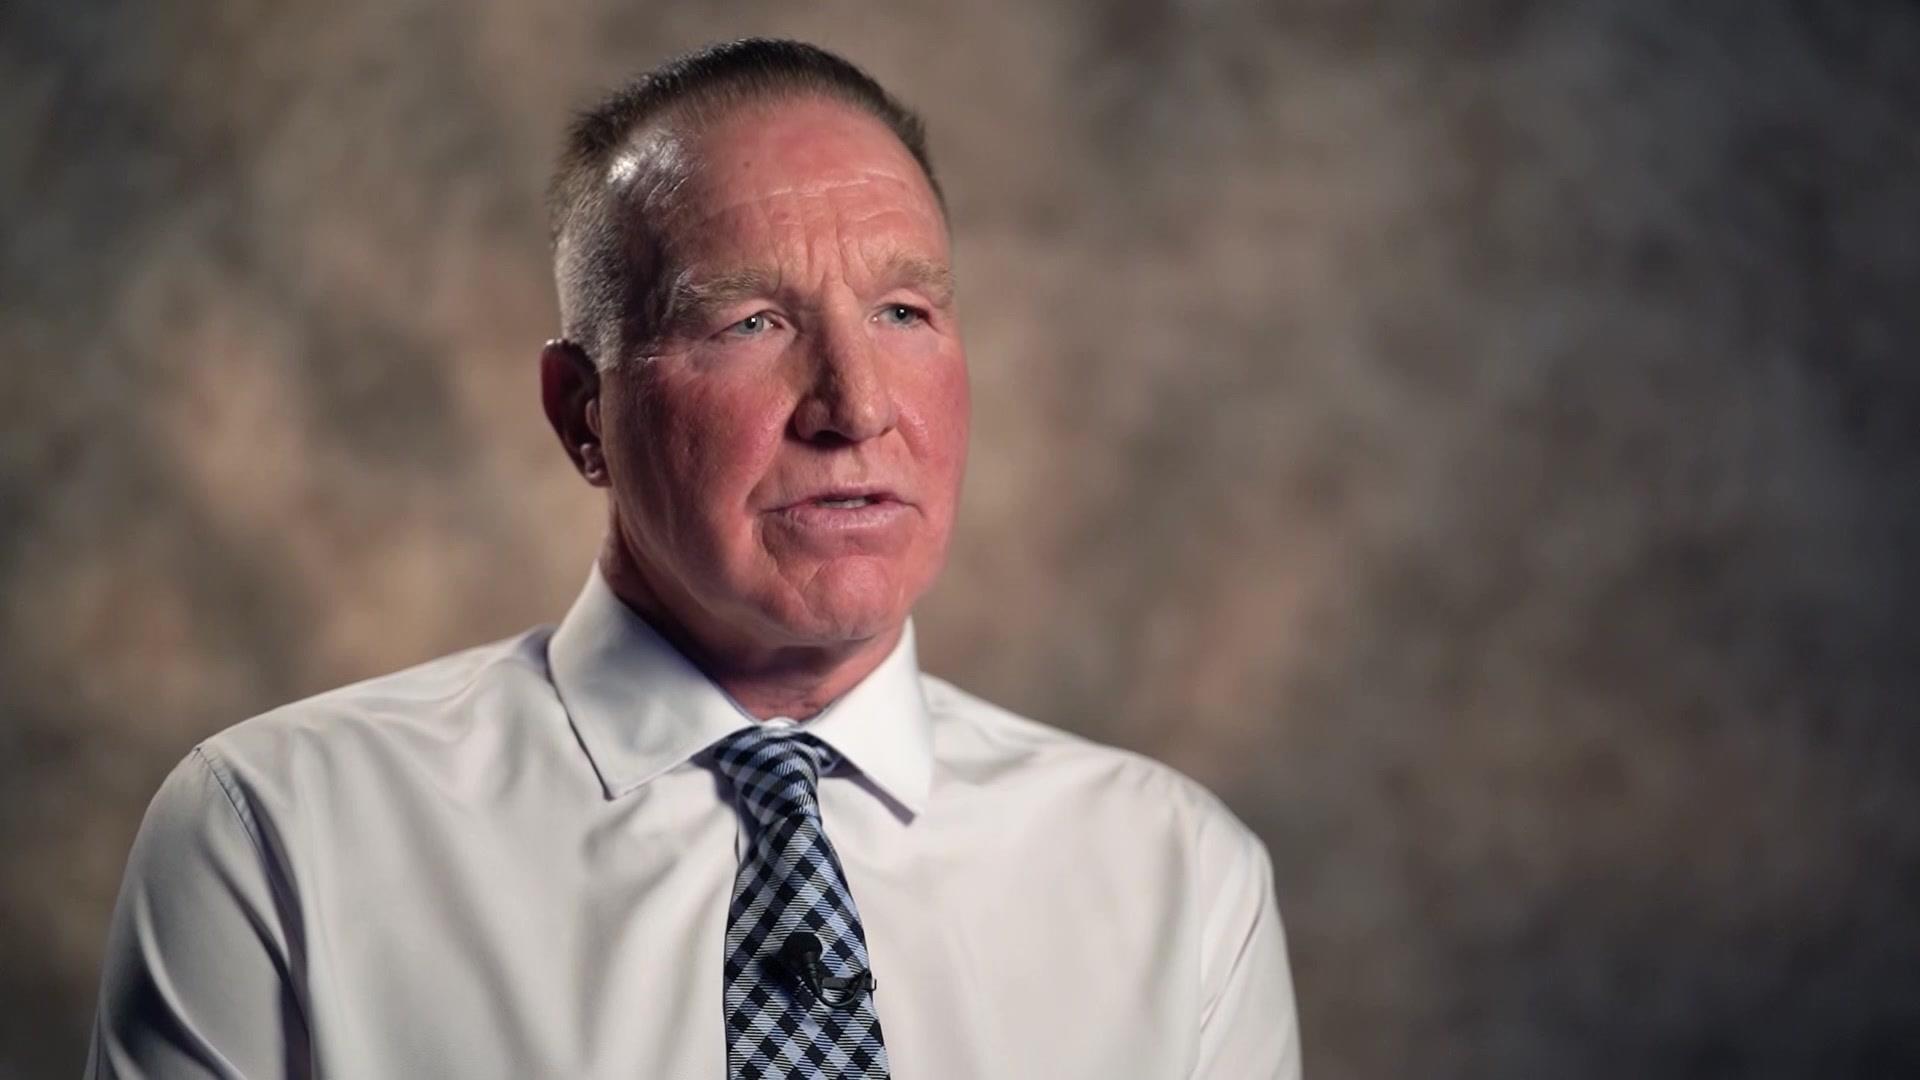 Chris Mullin opens up about alcohol rehab during NBA career